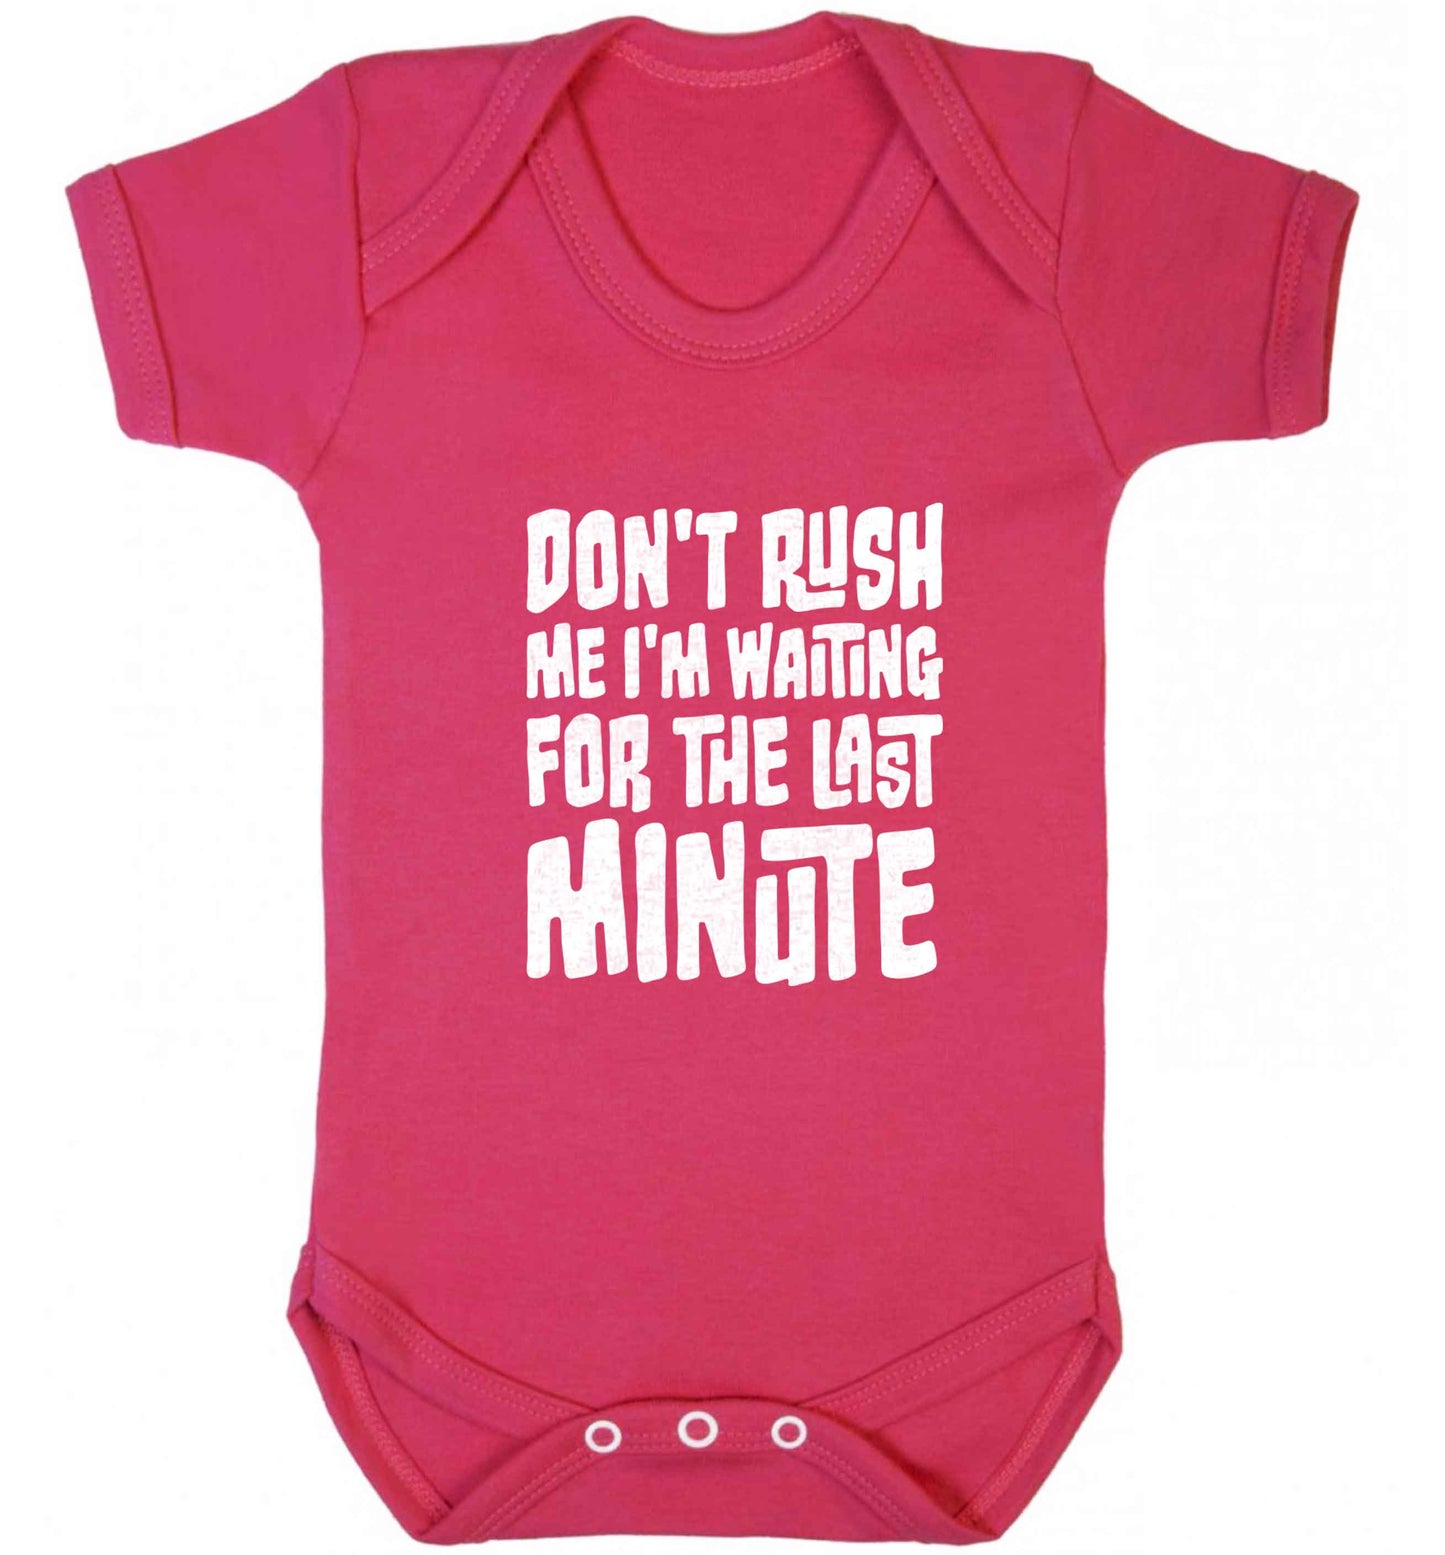 Don't rush me I'm waiting for the last minute baby vest dark pink 18-24 months